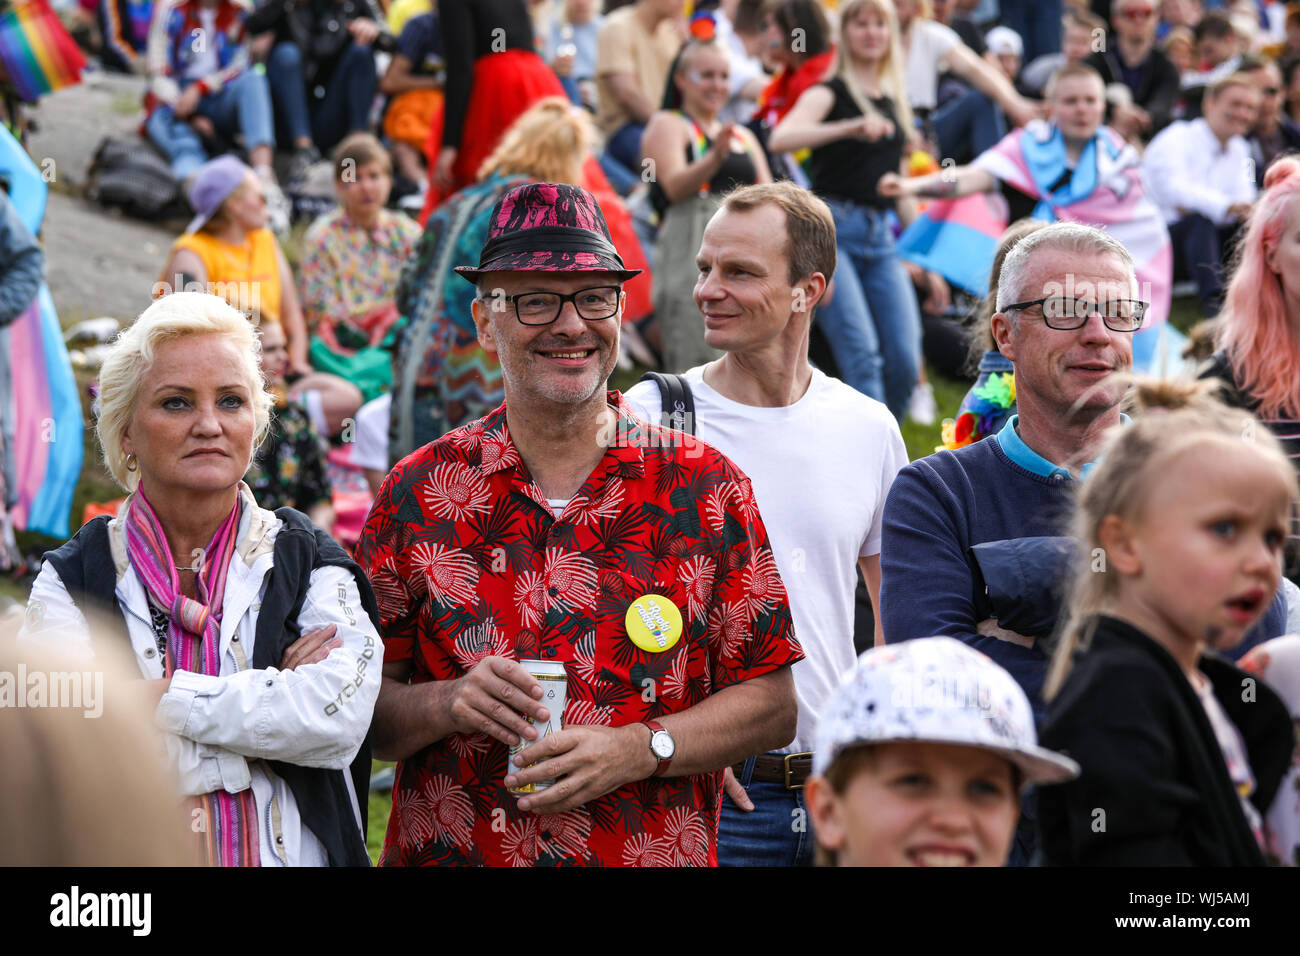 People at Helsinki Pride 2019 after-party in Kaivopuisto Park Stock Photo